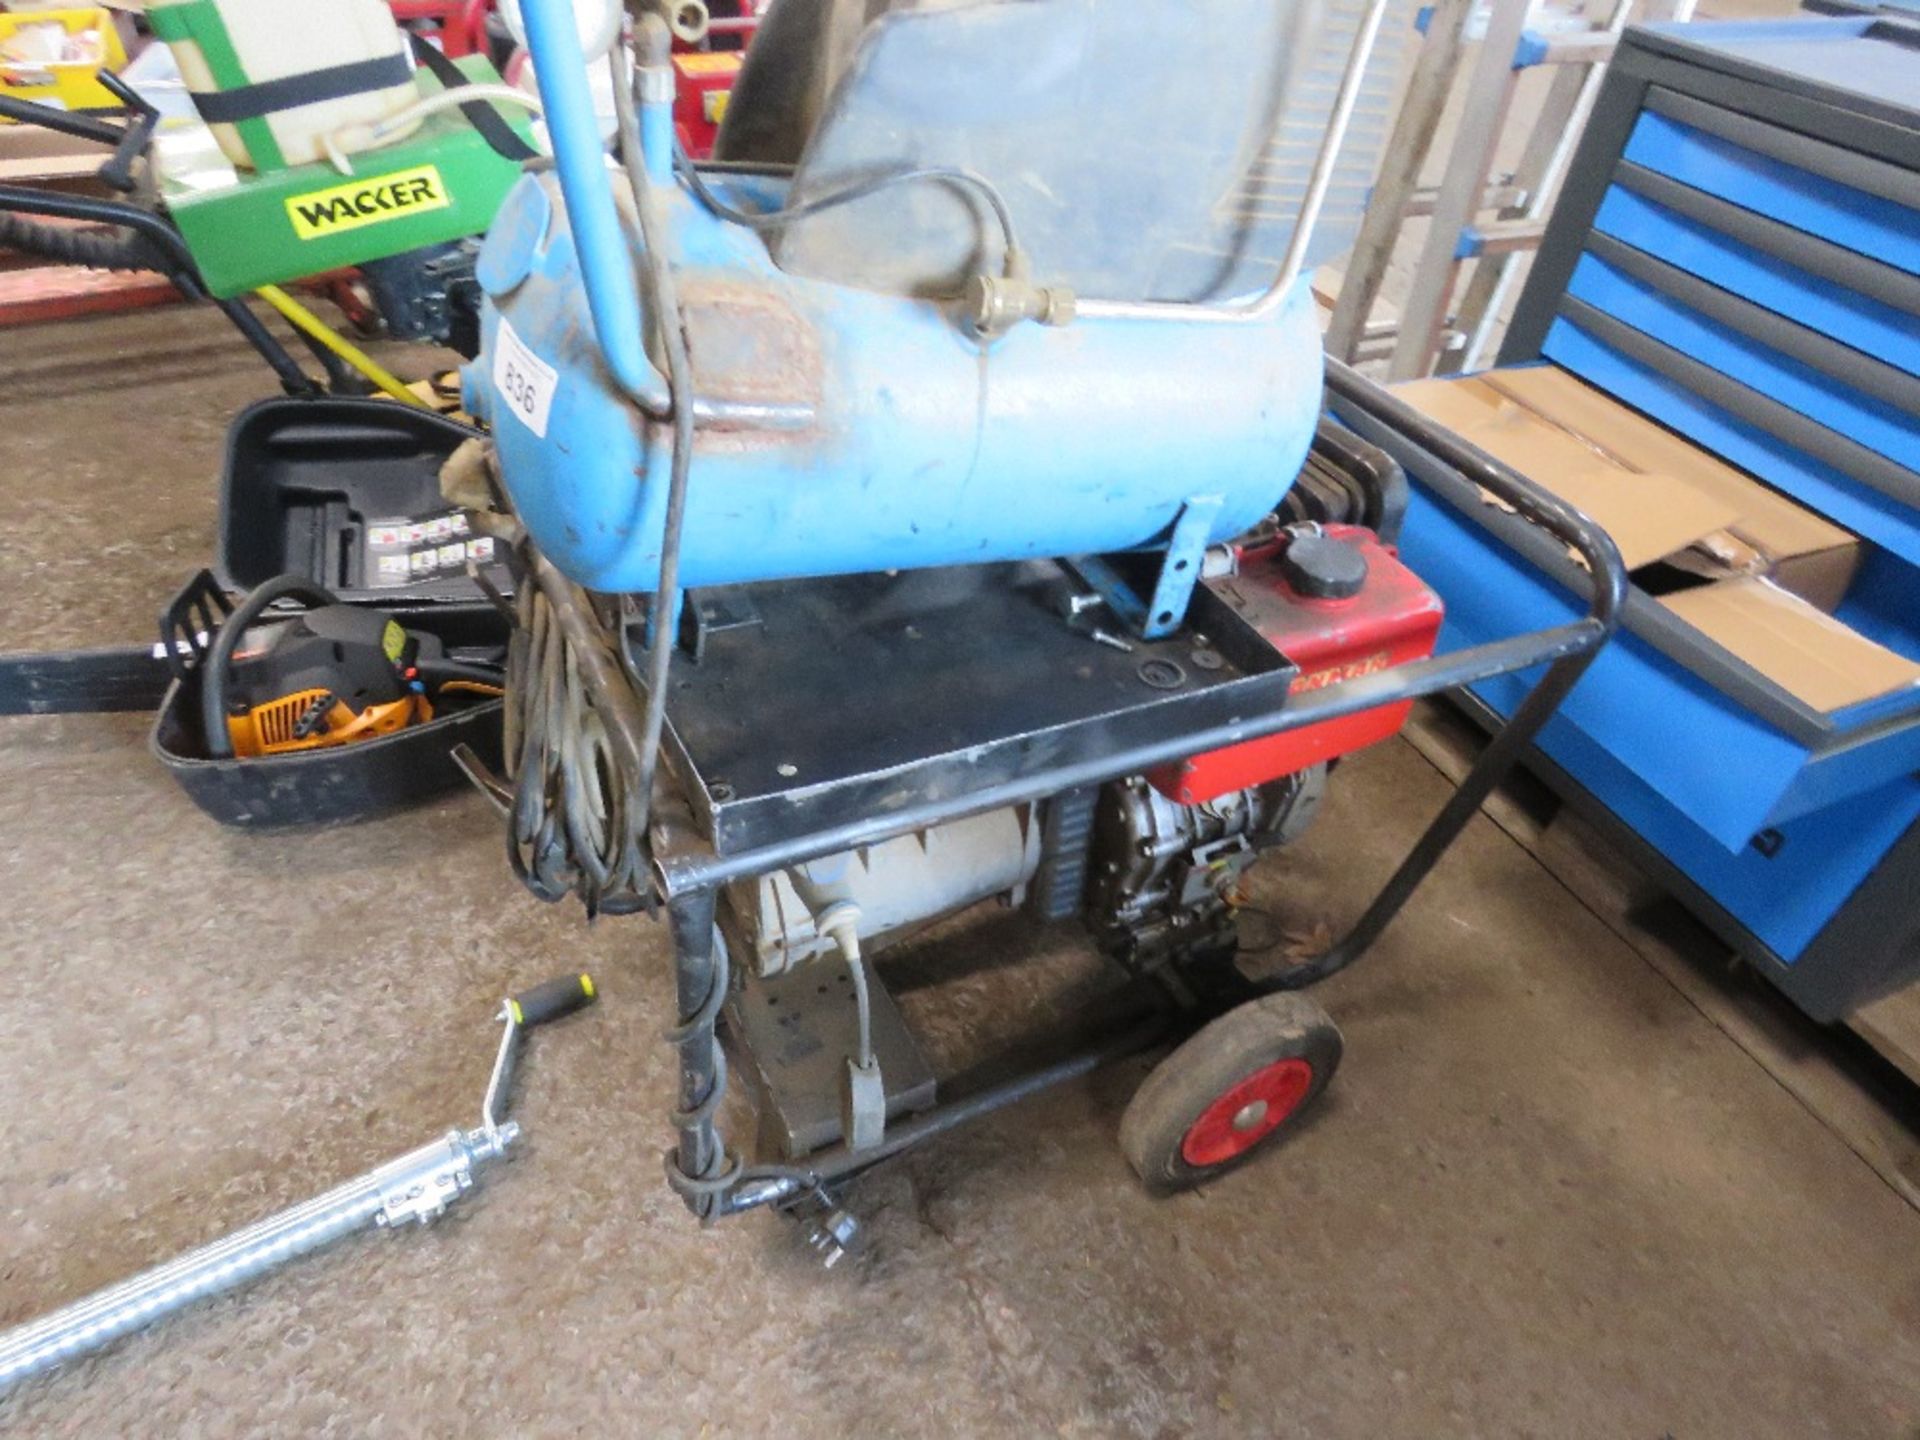 YANMAR DIESEL ENGINED WELDER GENERATOR WITH LEADS AND A SMALL COMPRESSOR FITTED.